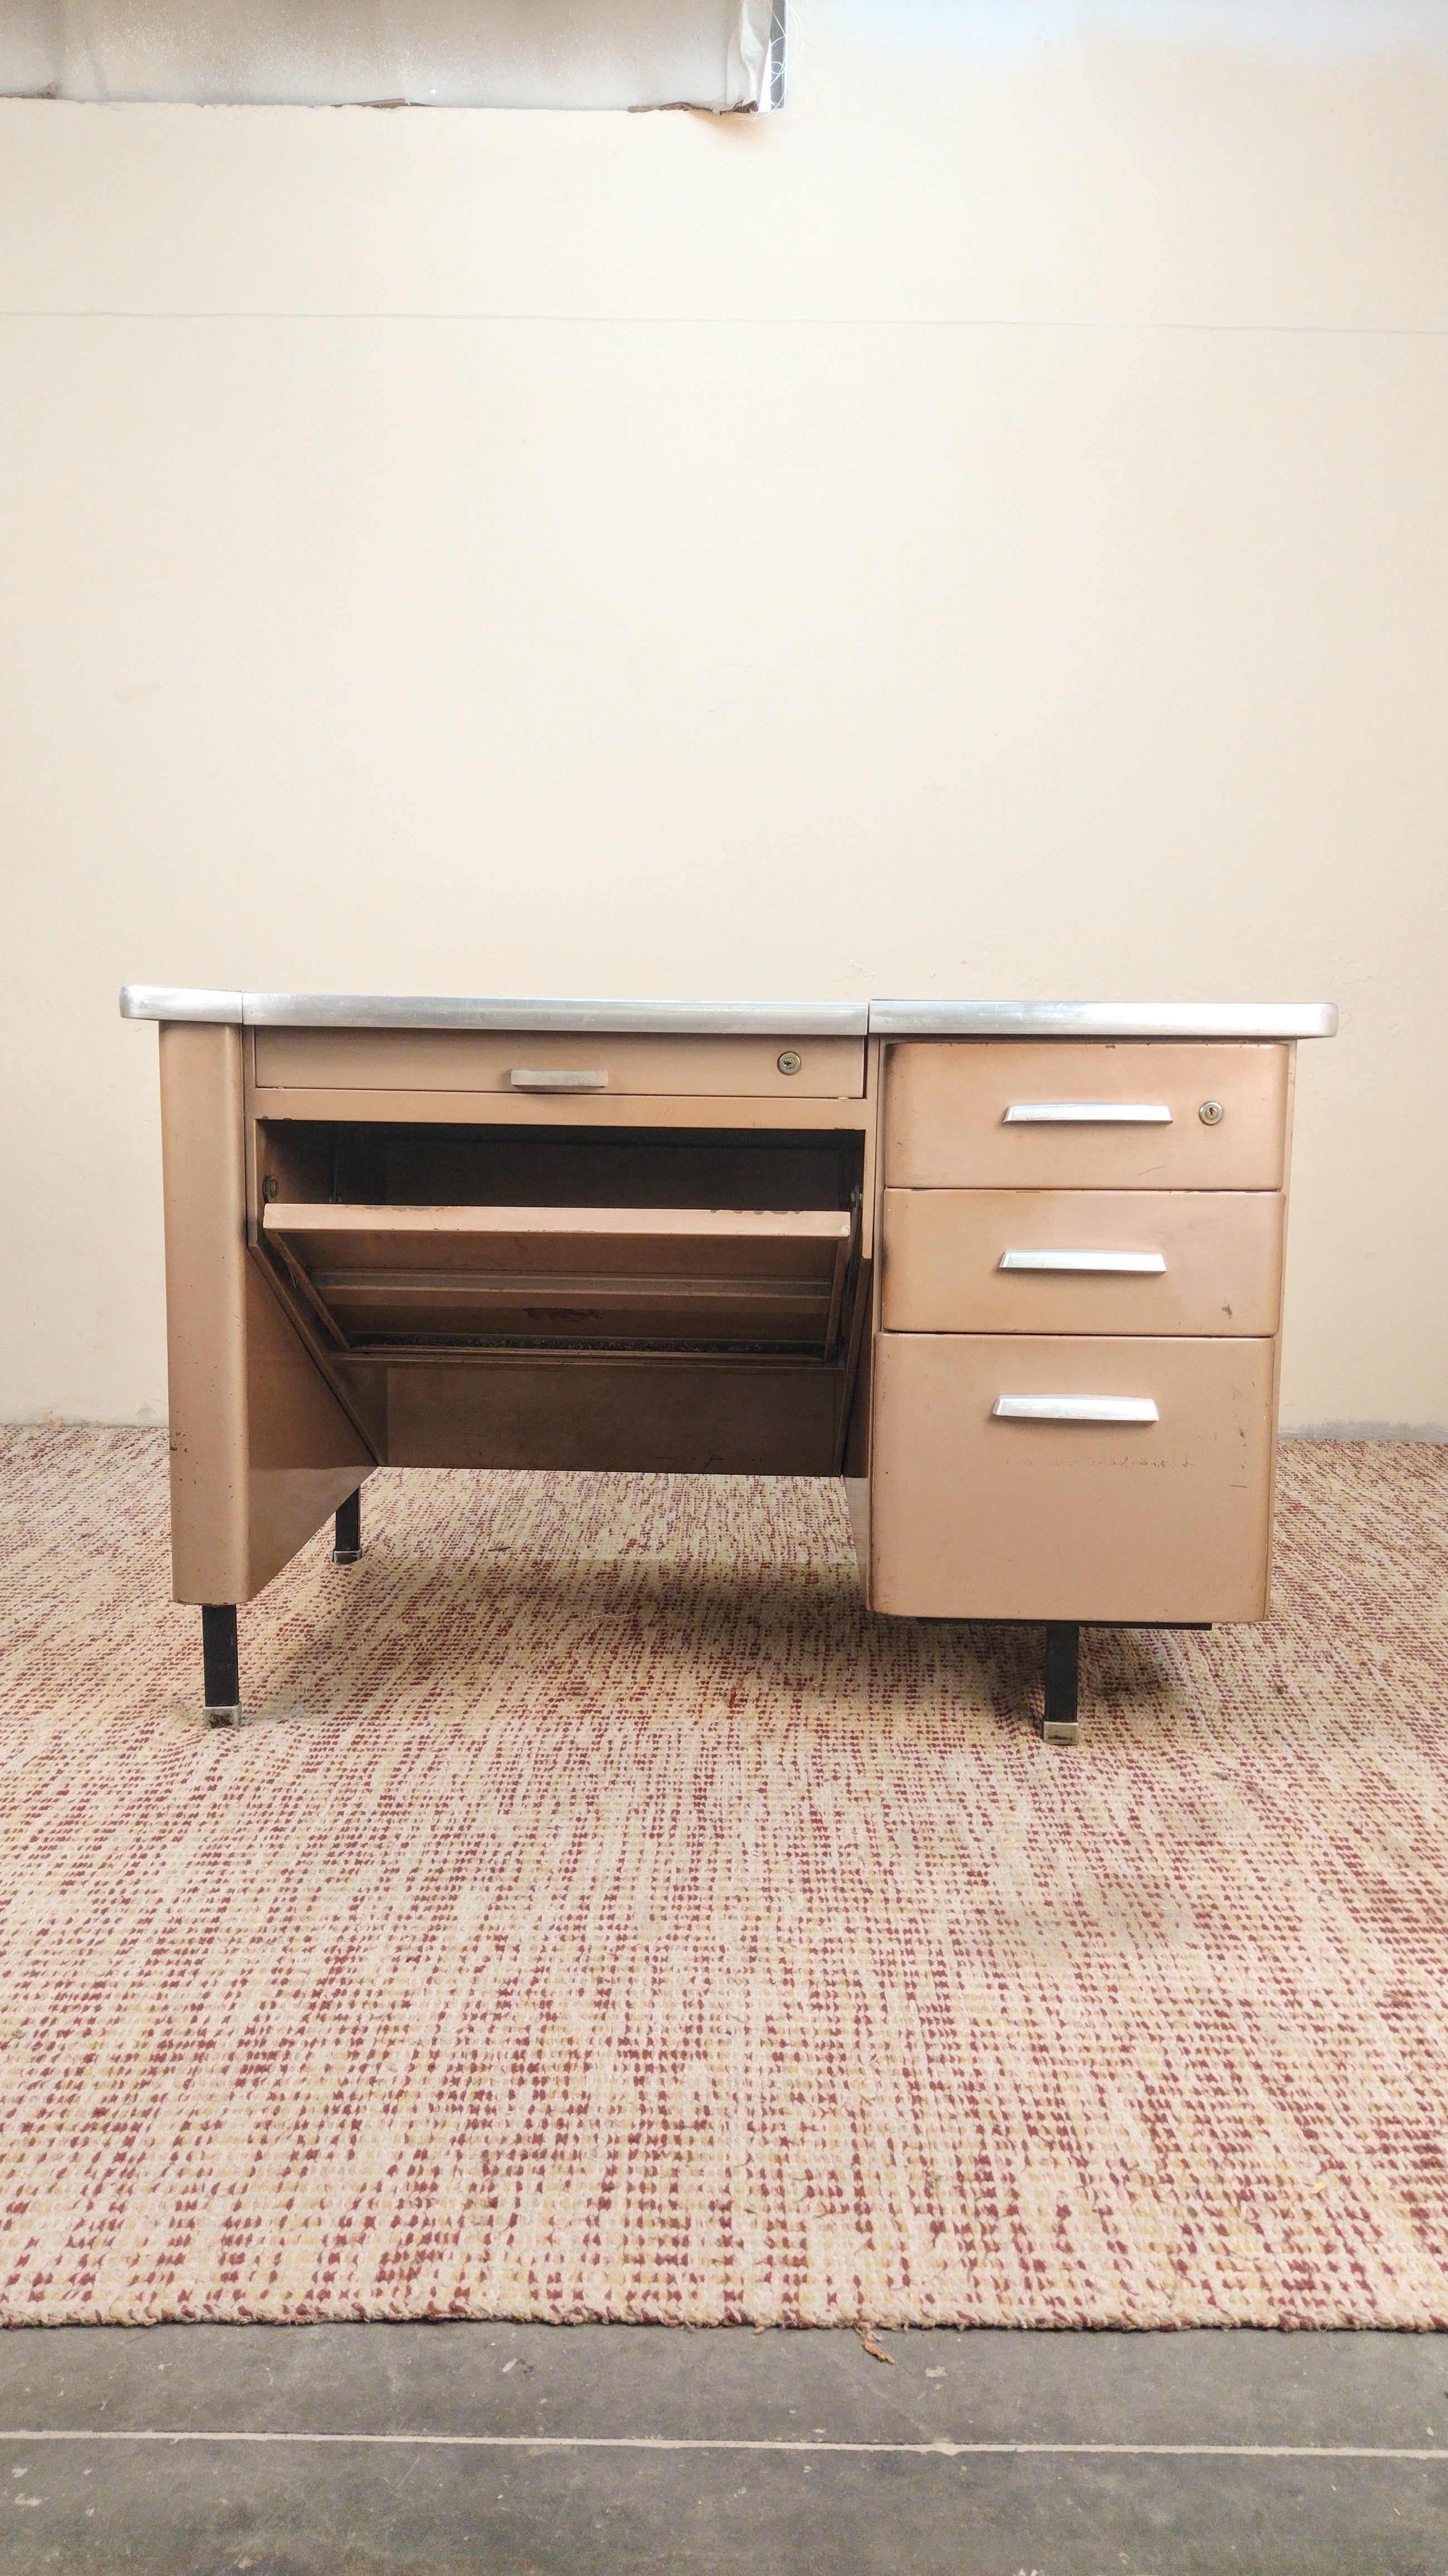 INDEFINITE USE industrial steel desk from the 1970s (L- 120cm)